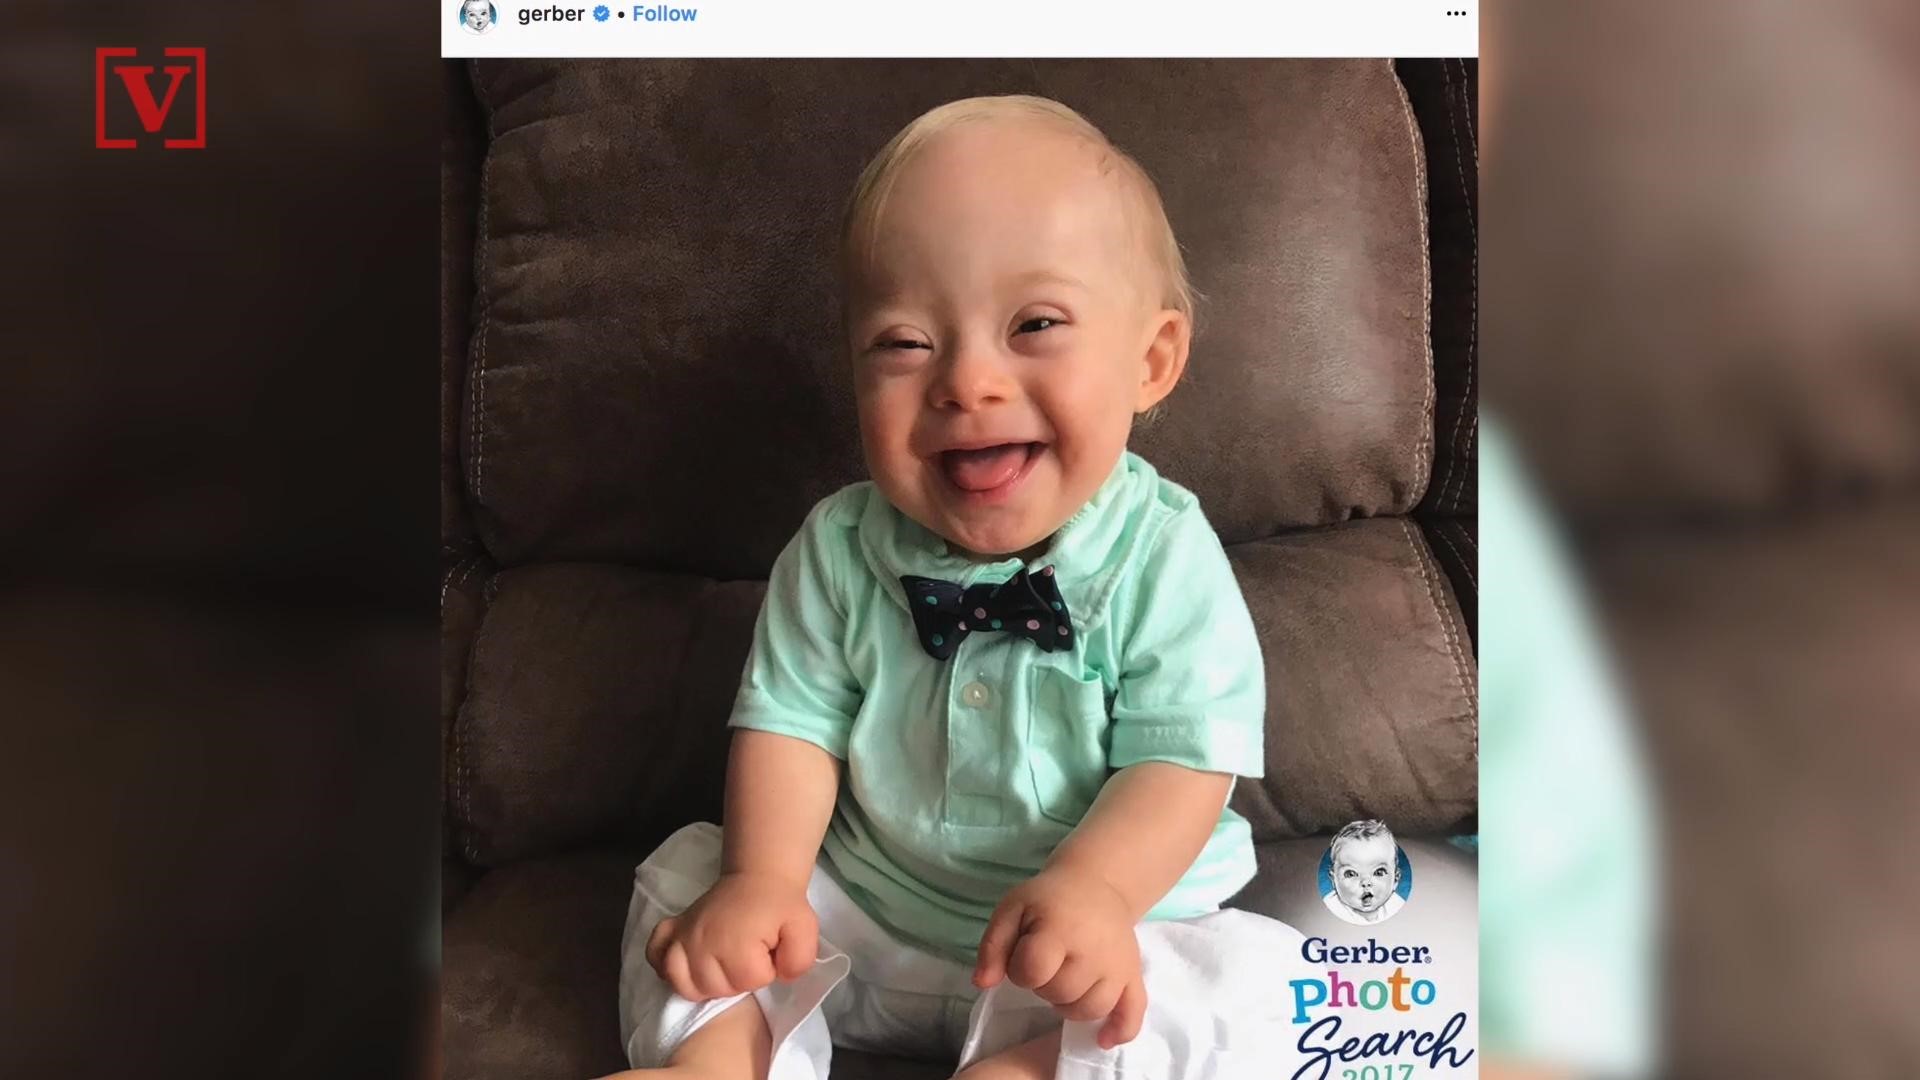 The photo of baby Lucas was submitted by his mother because people always comment on his smile. Veuer's Josh King has more.